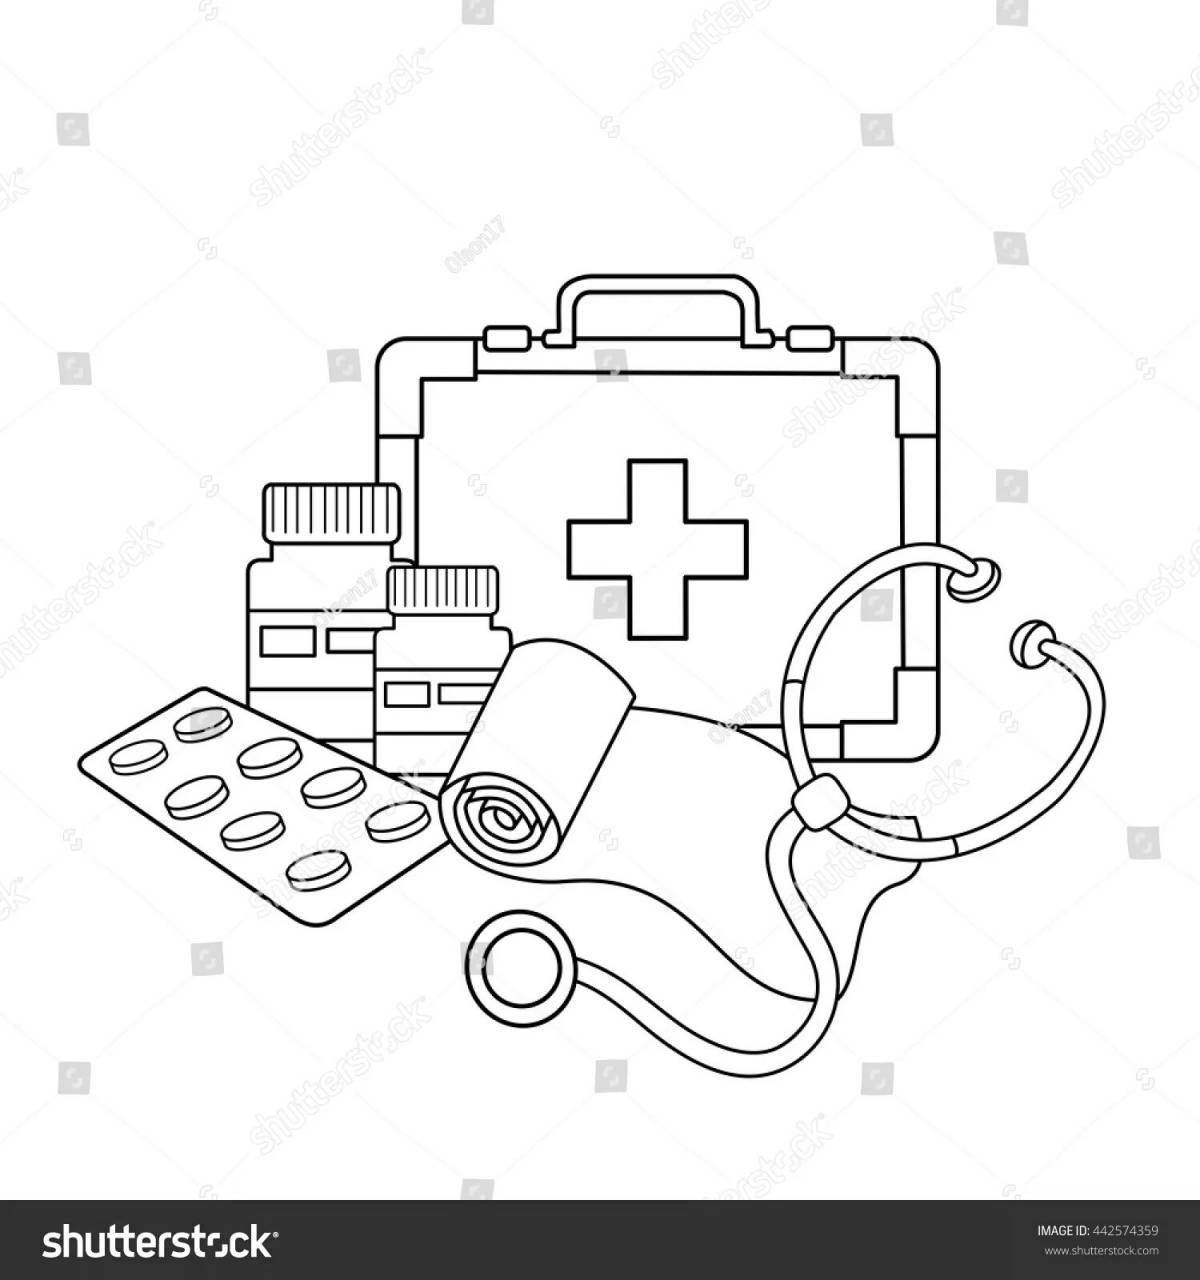 Colored explosive first aid kit coloring book